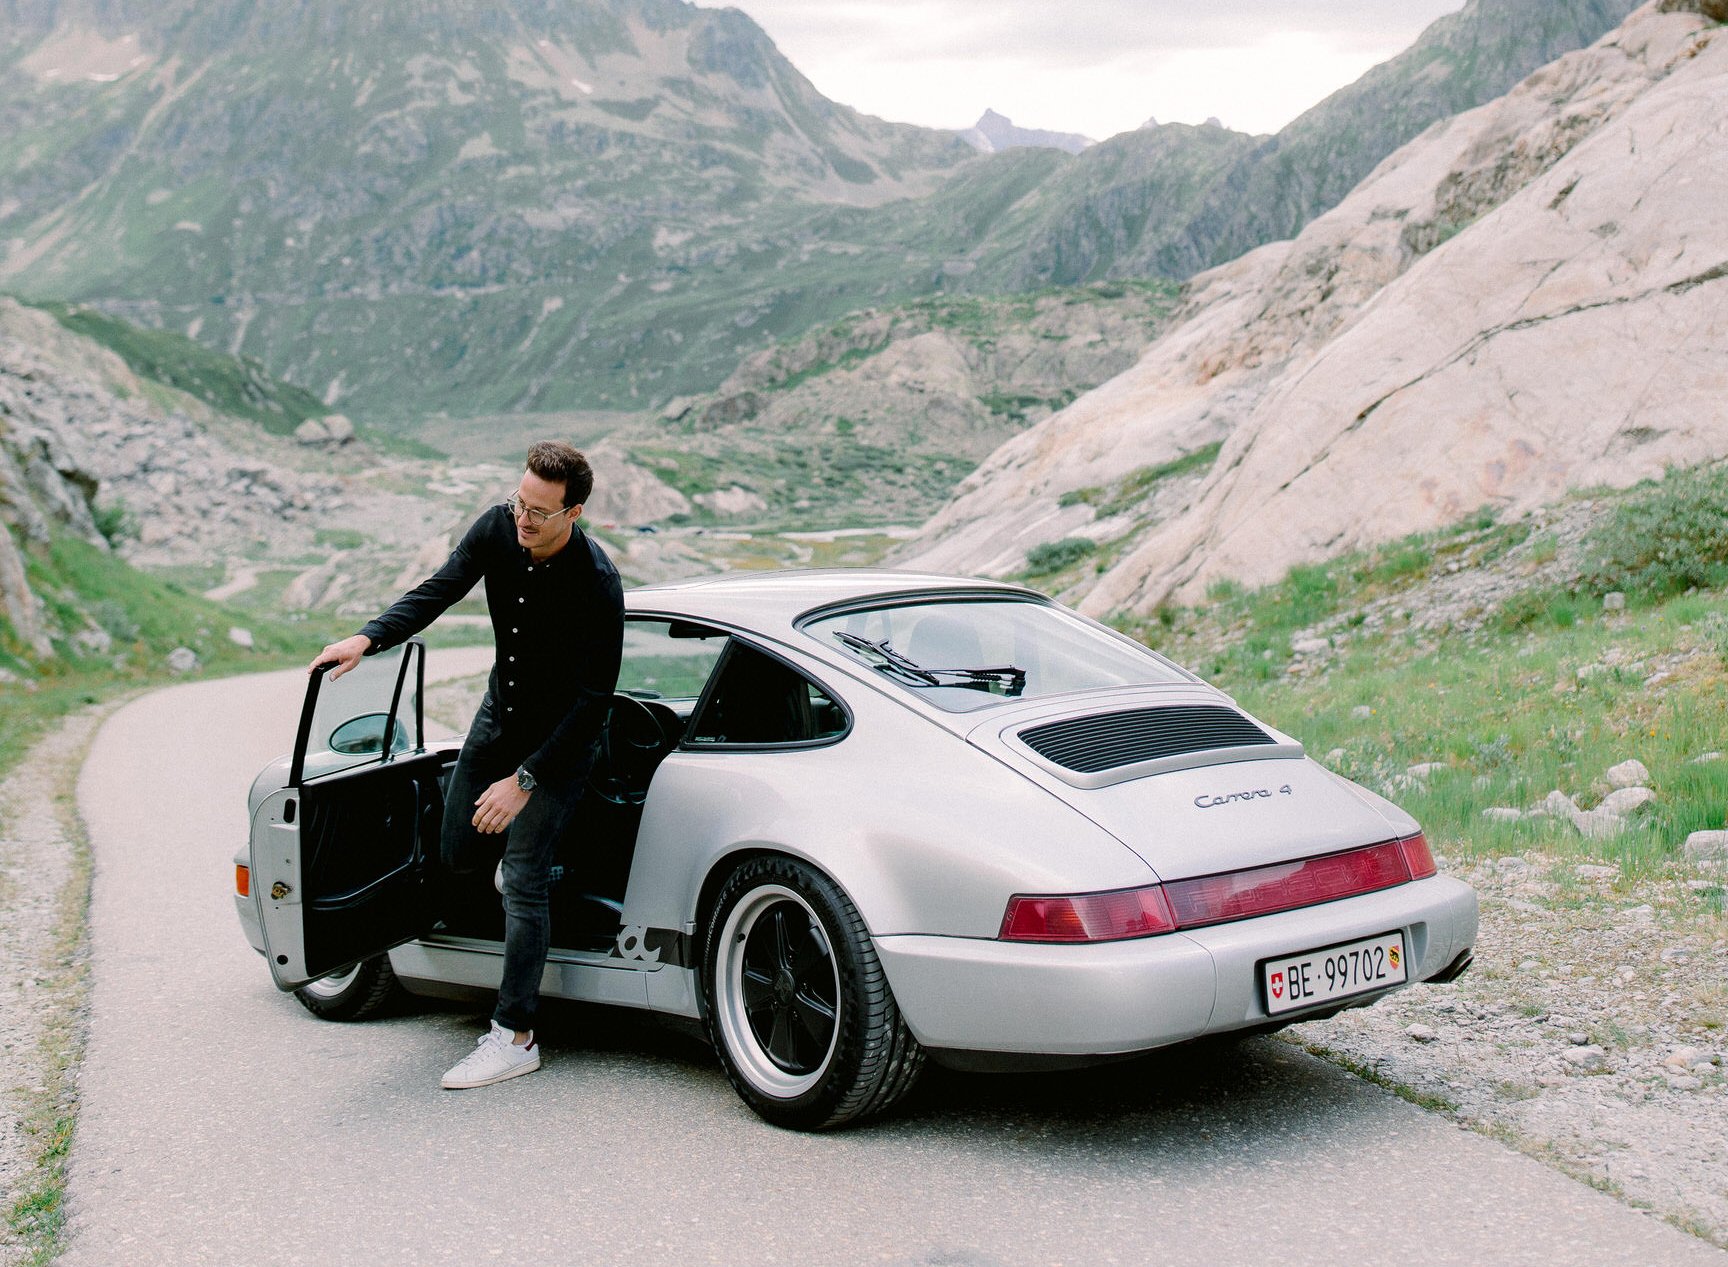 Janick and his first Porsche